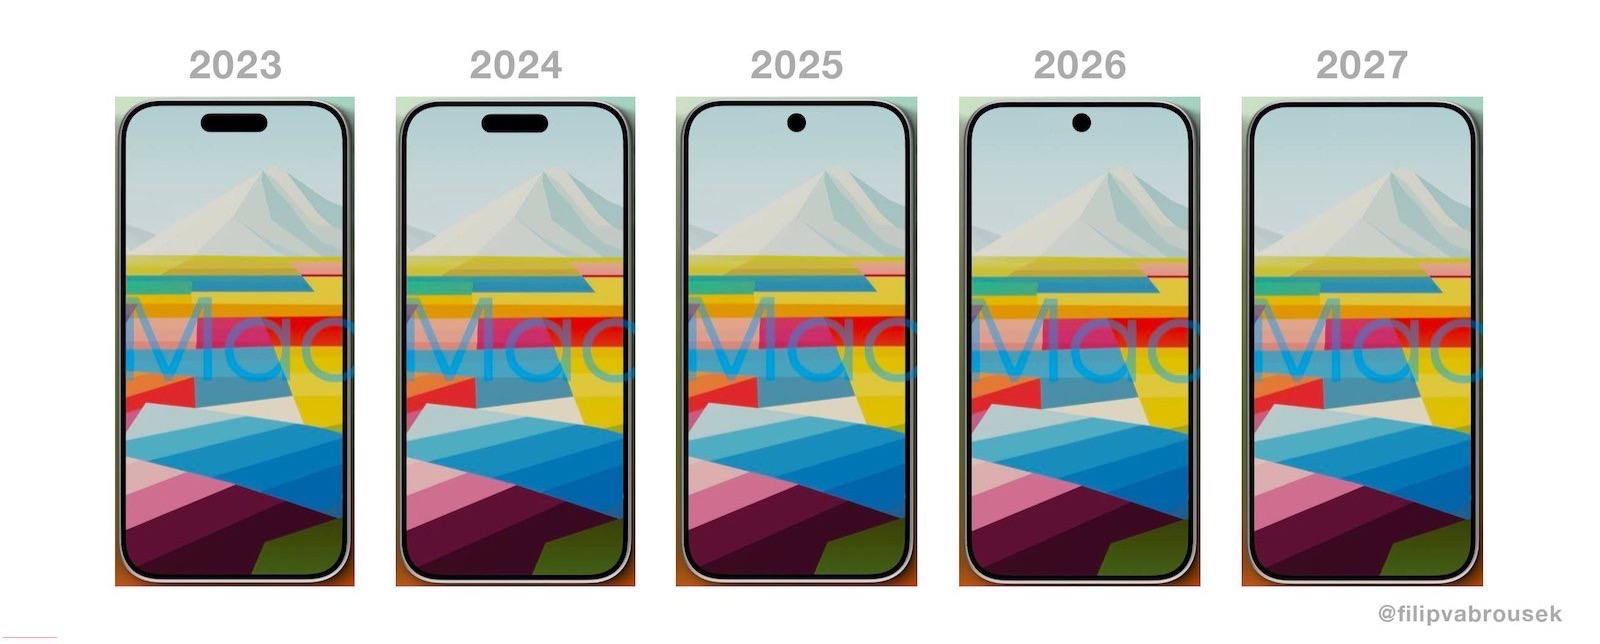 How iphone pro models will evolve